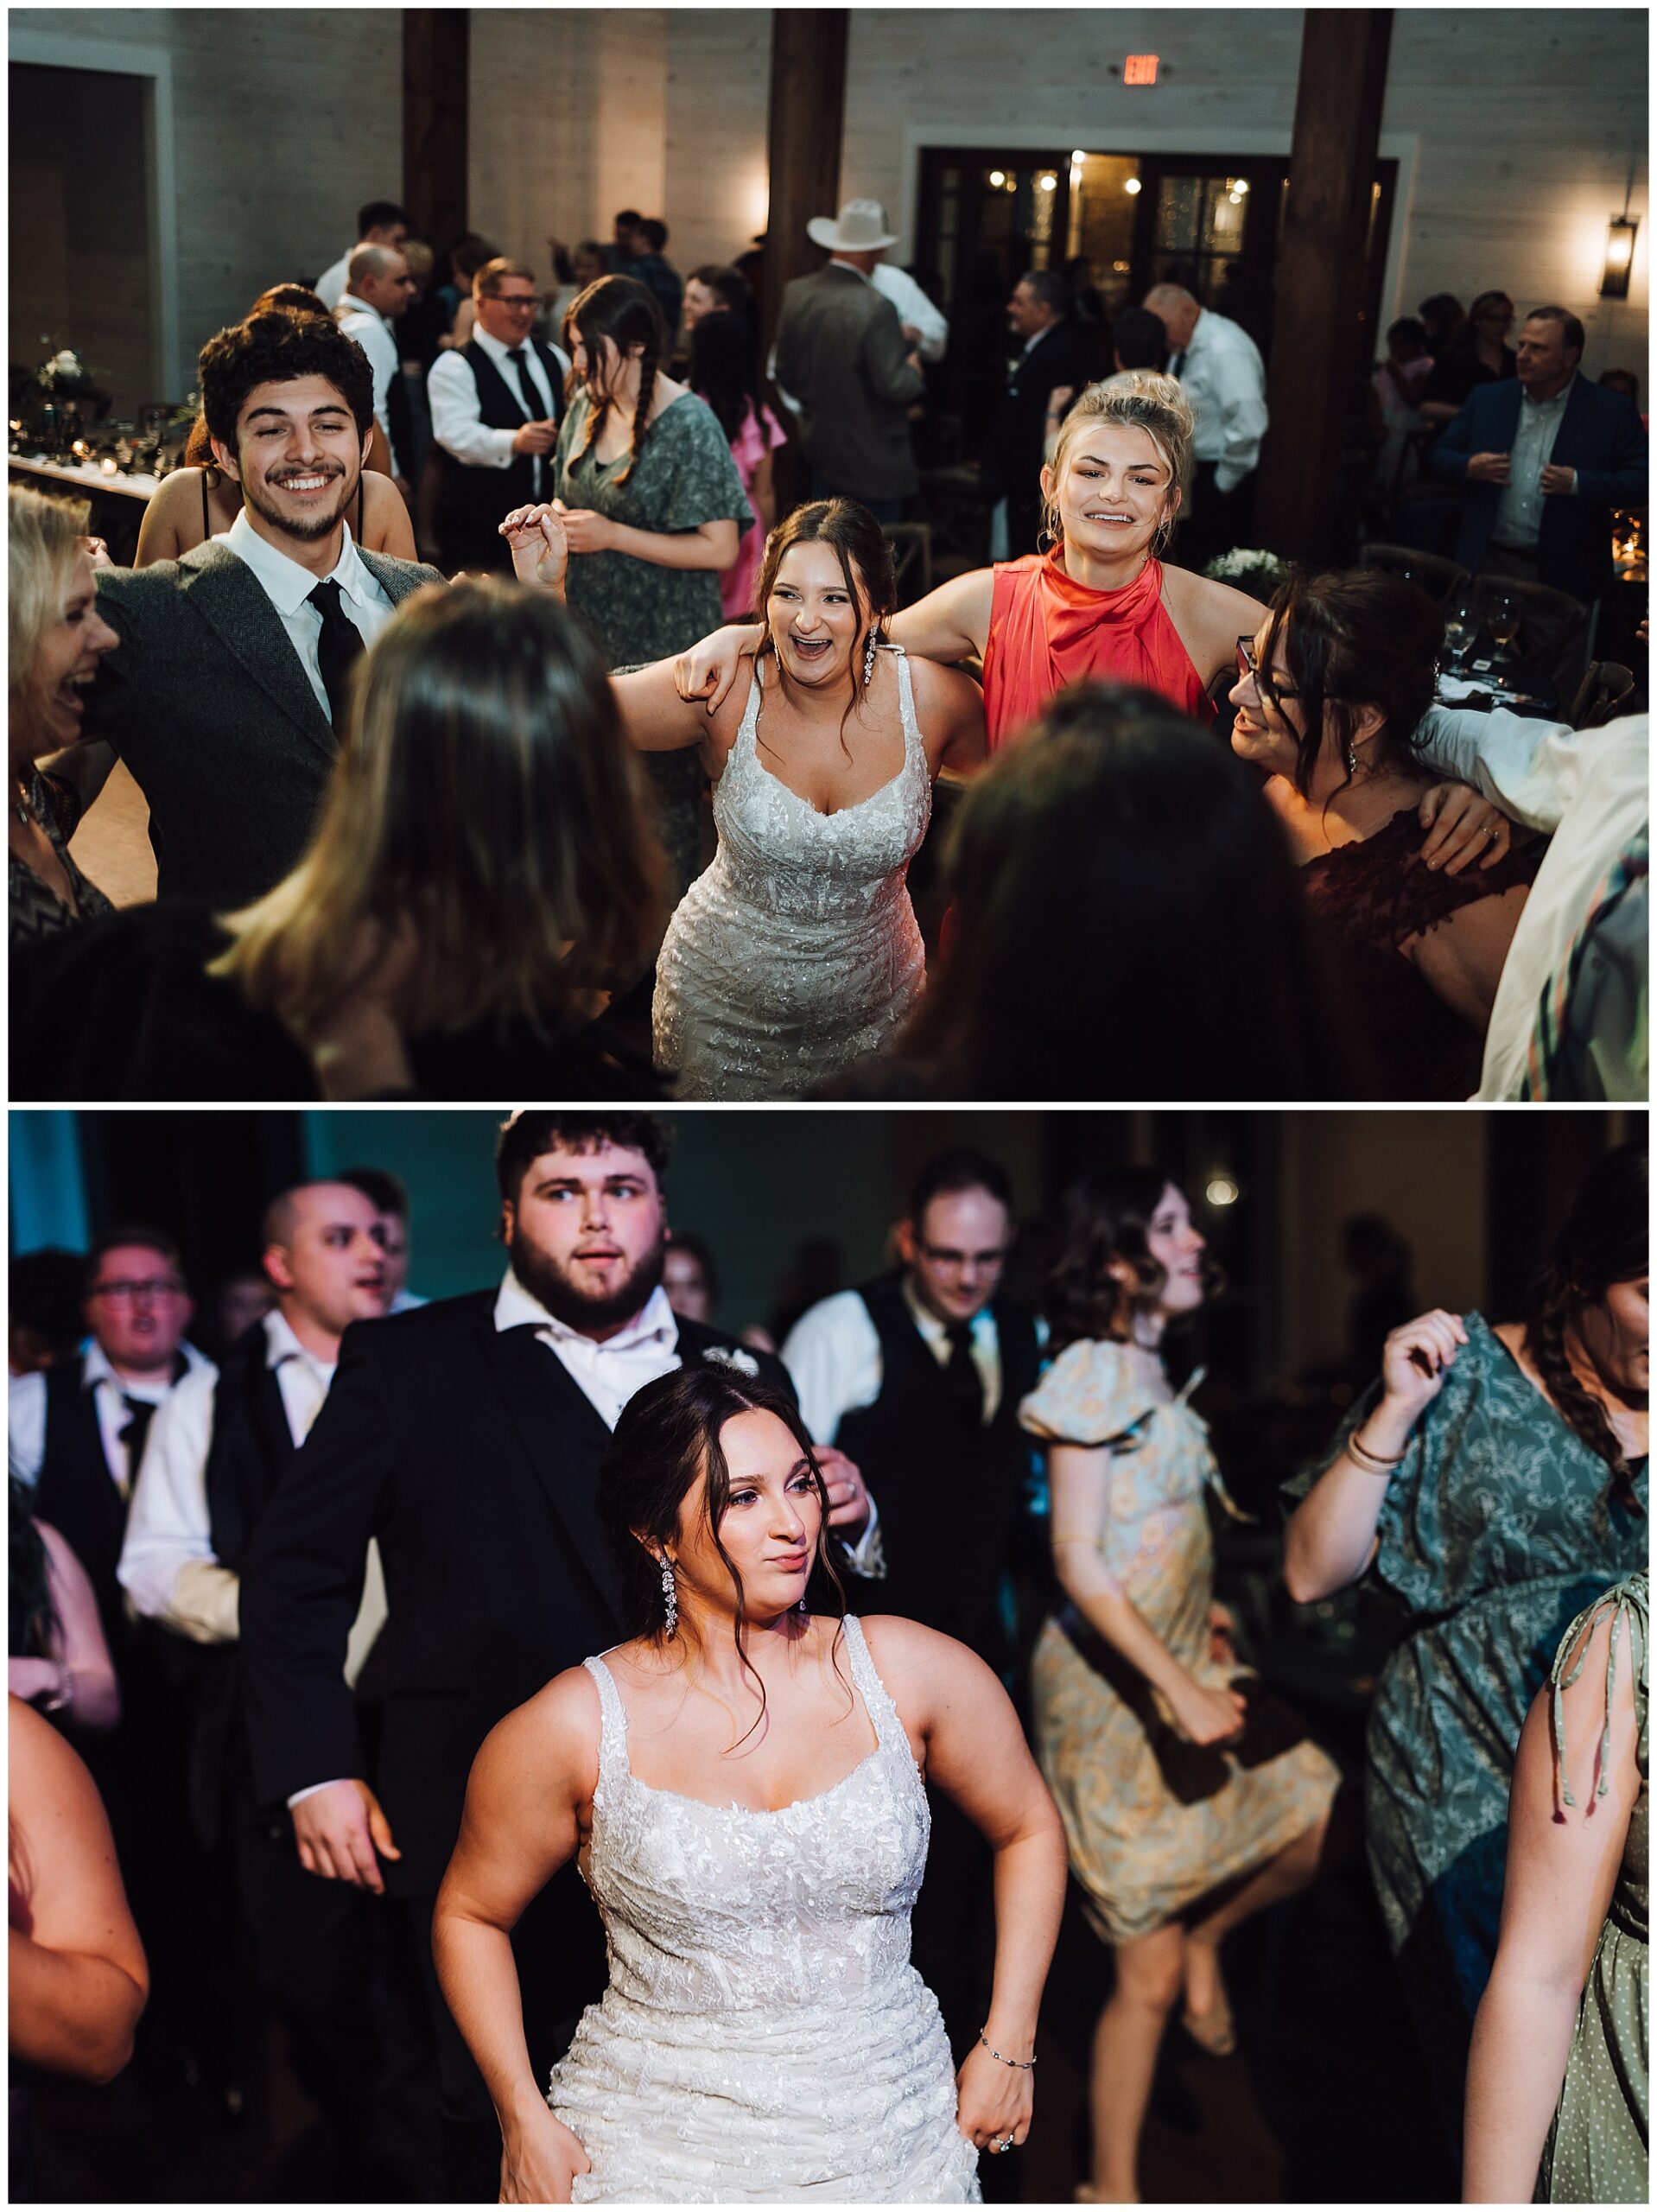 A bride dances amongst her wedding guests during the reception